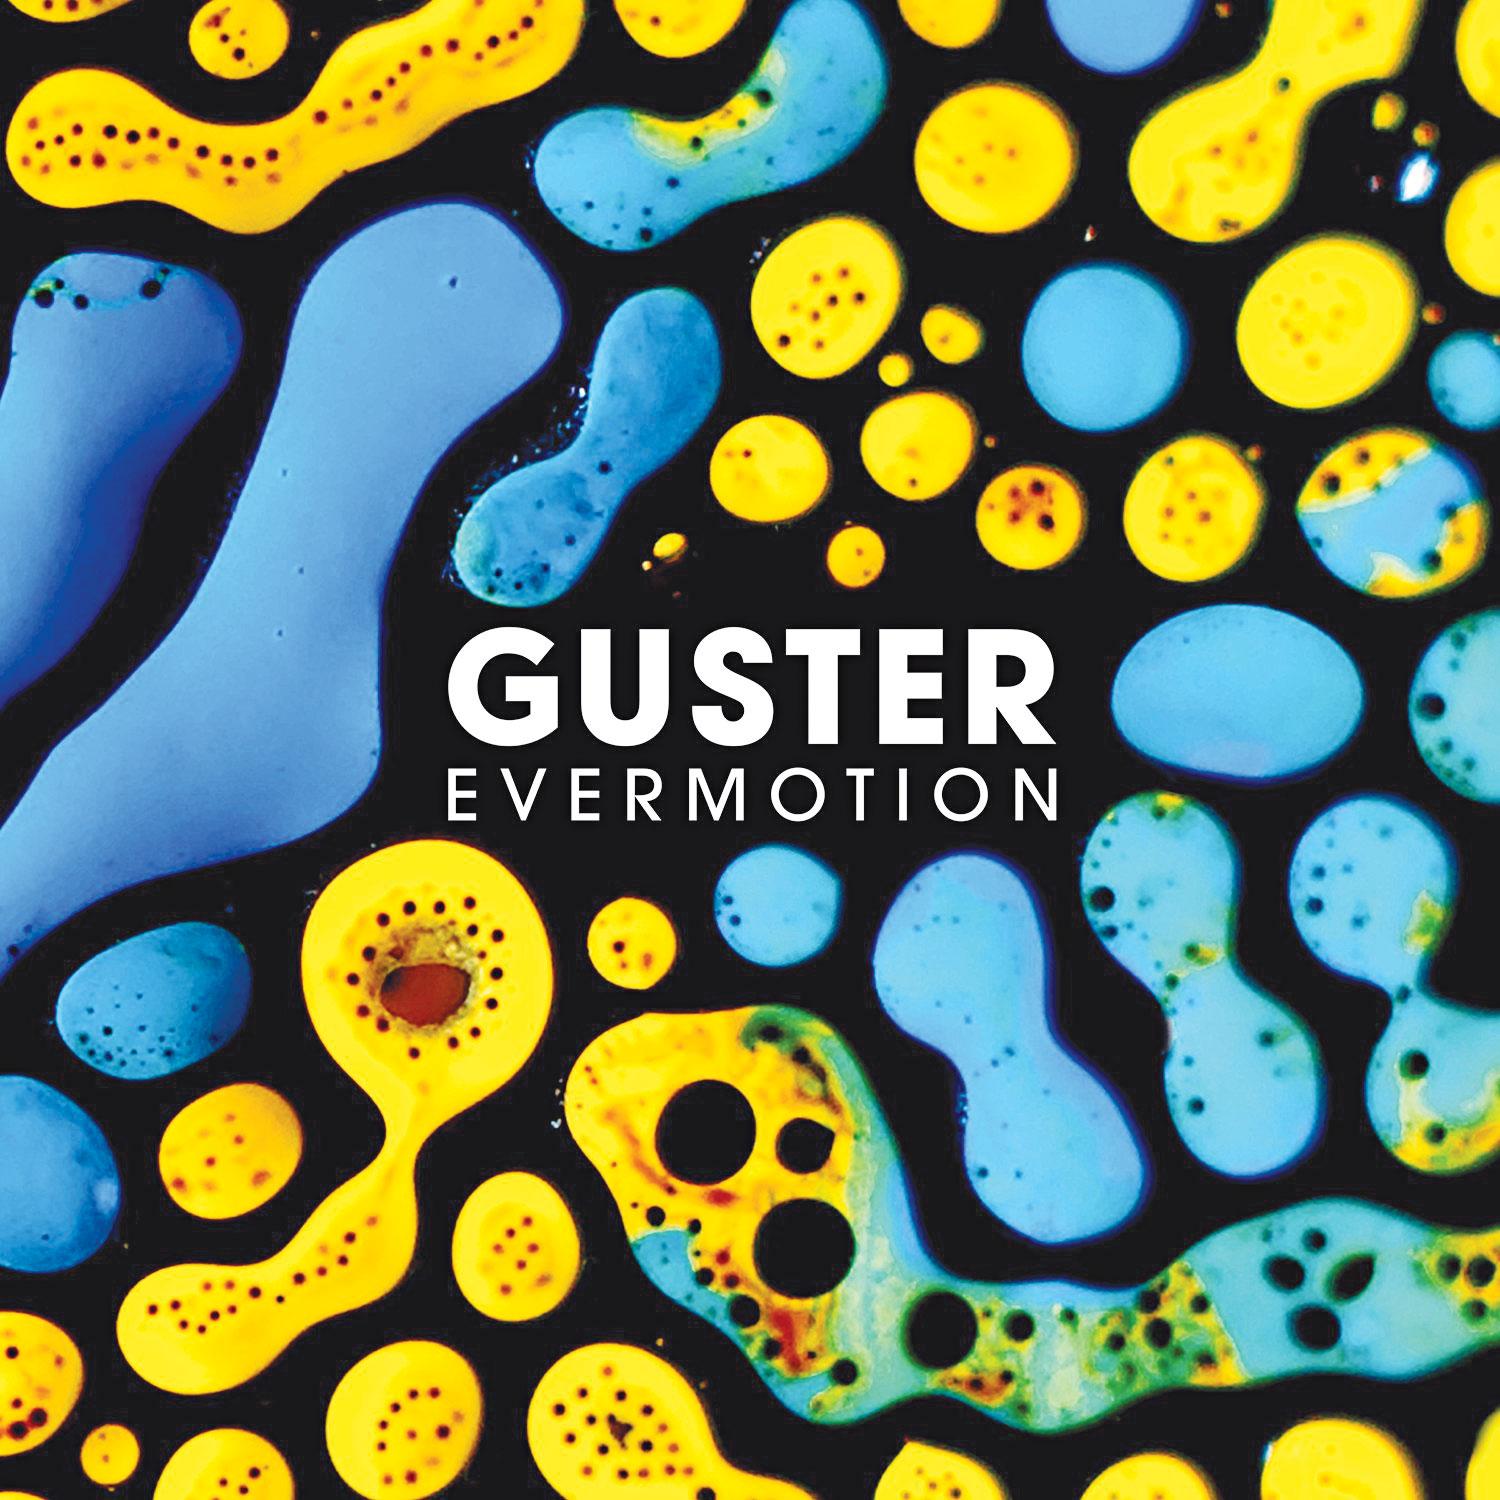 Review: Synthetic sounds disappoint in Guster’s new album